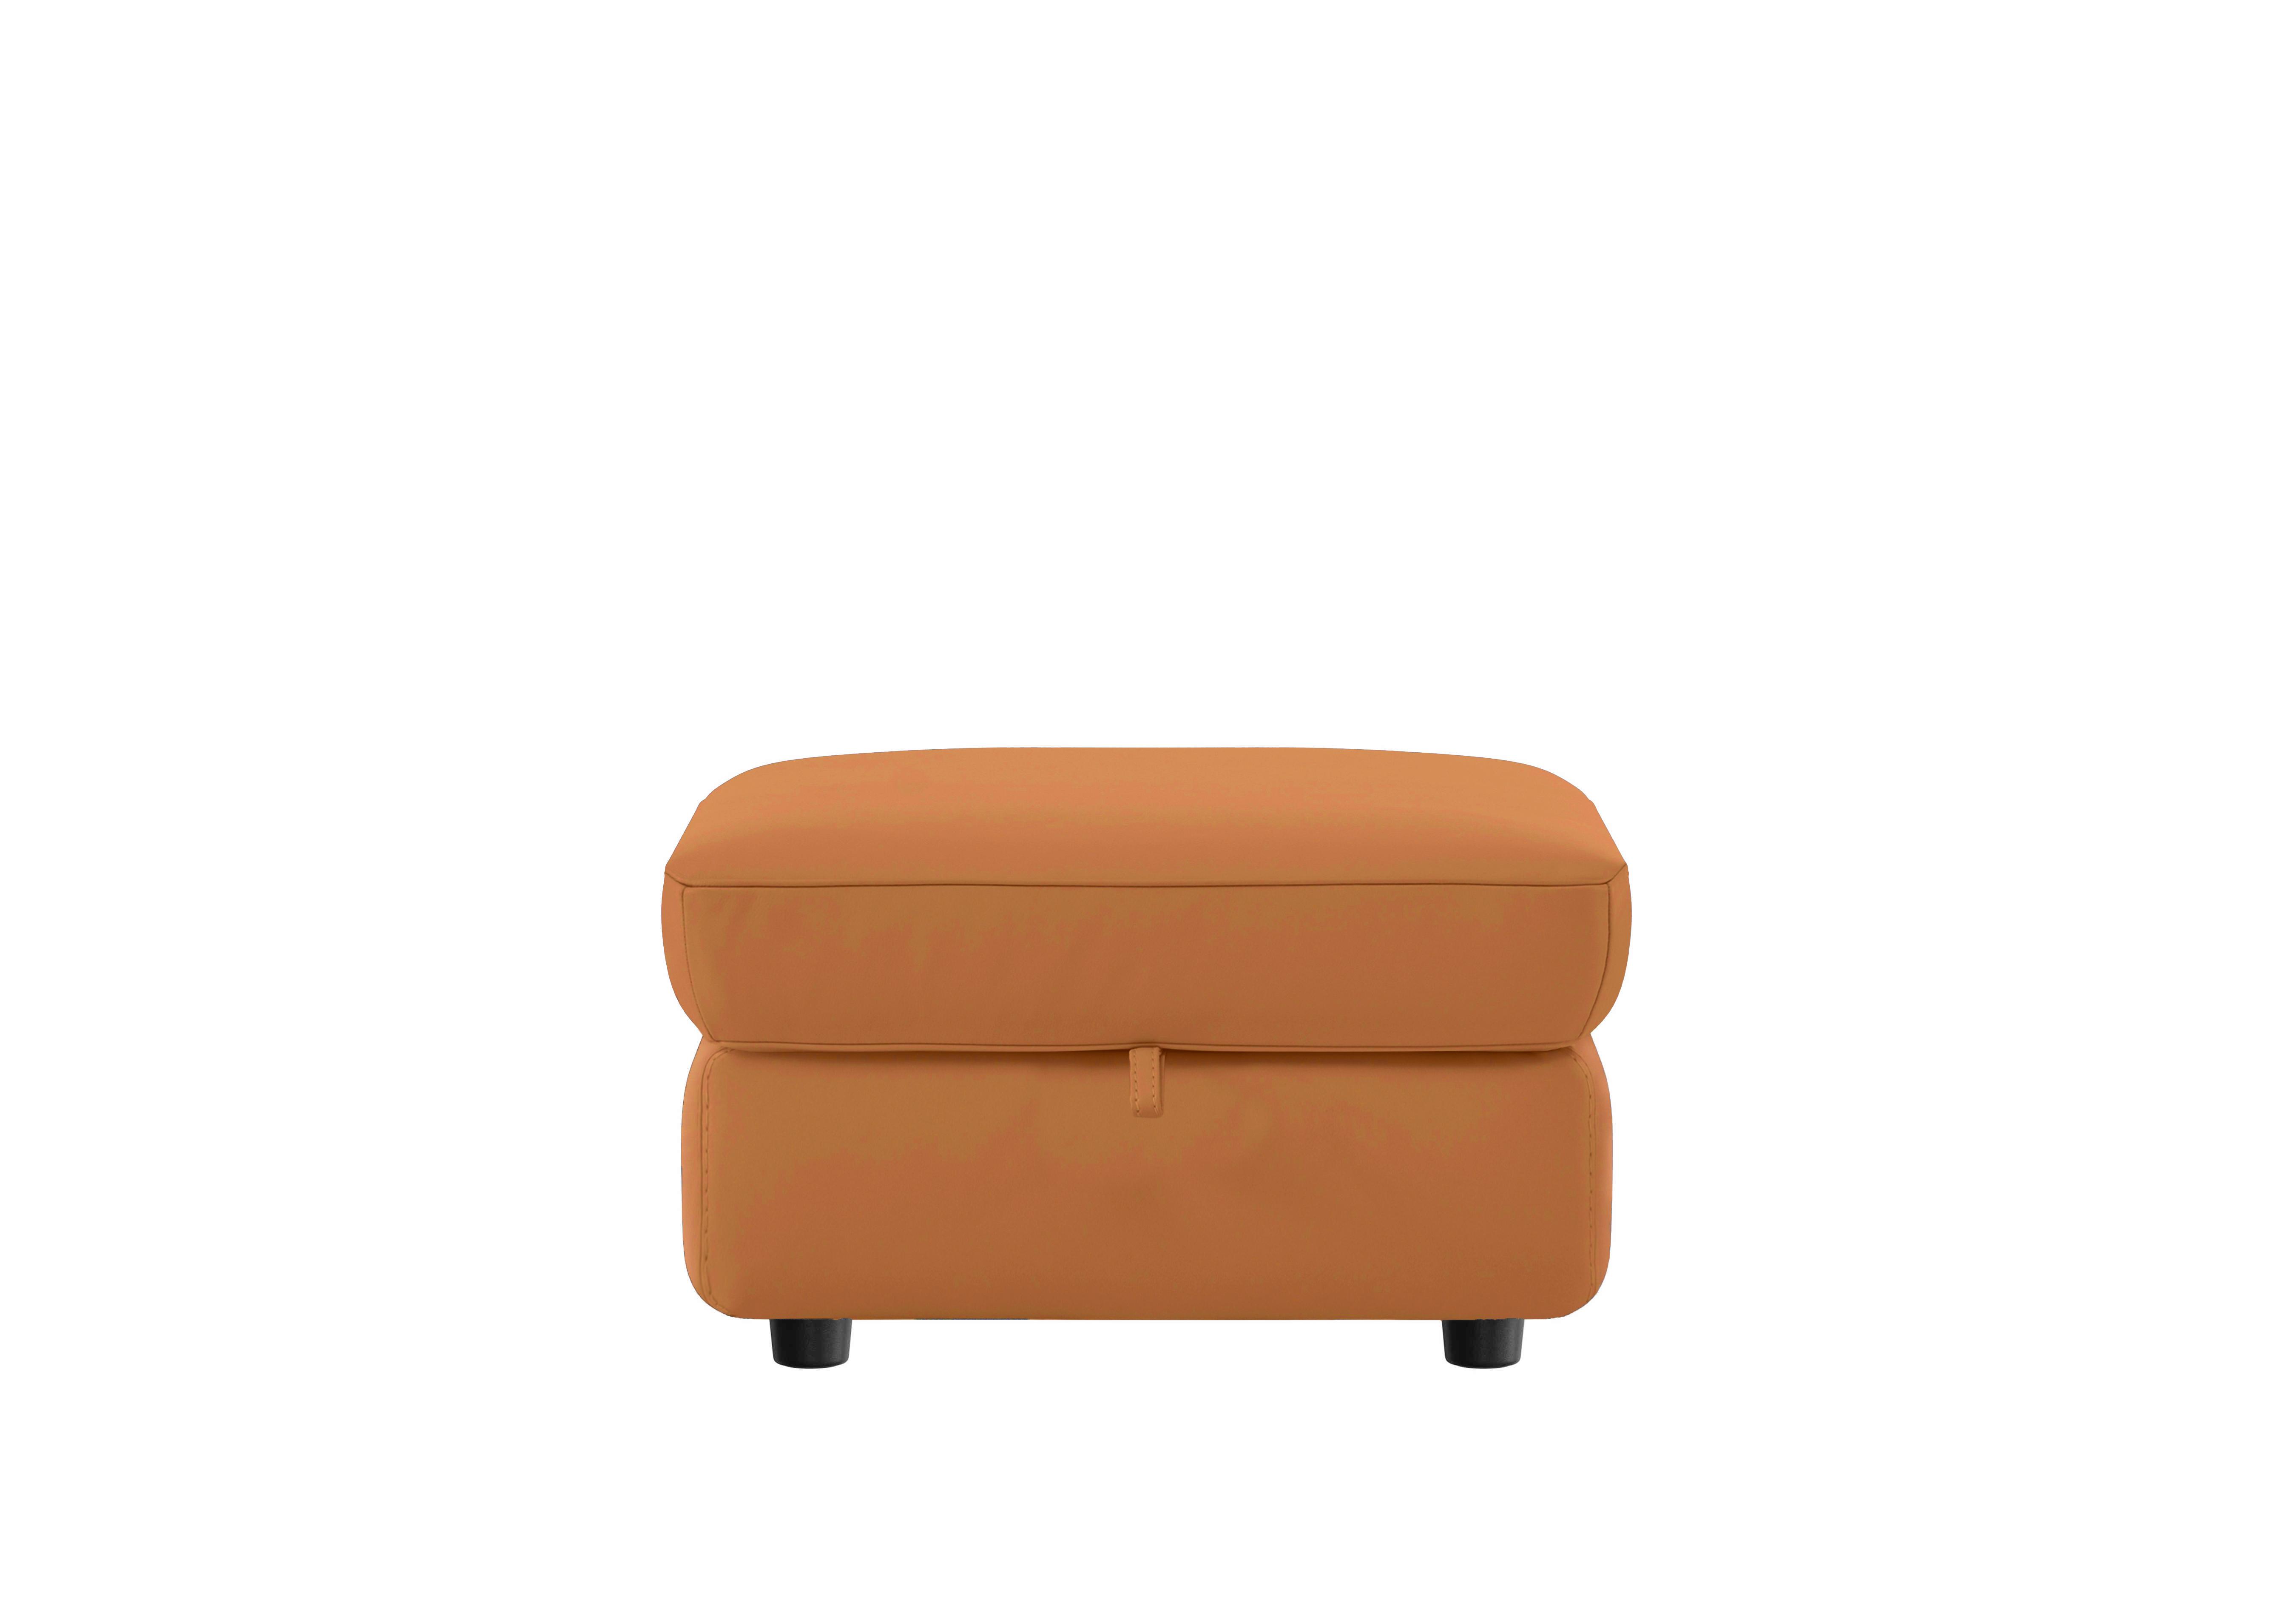 Compact Collection Piccolo Leather Storage Footstool in Bv-335e Honey Yellow on Furniture Village